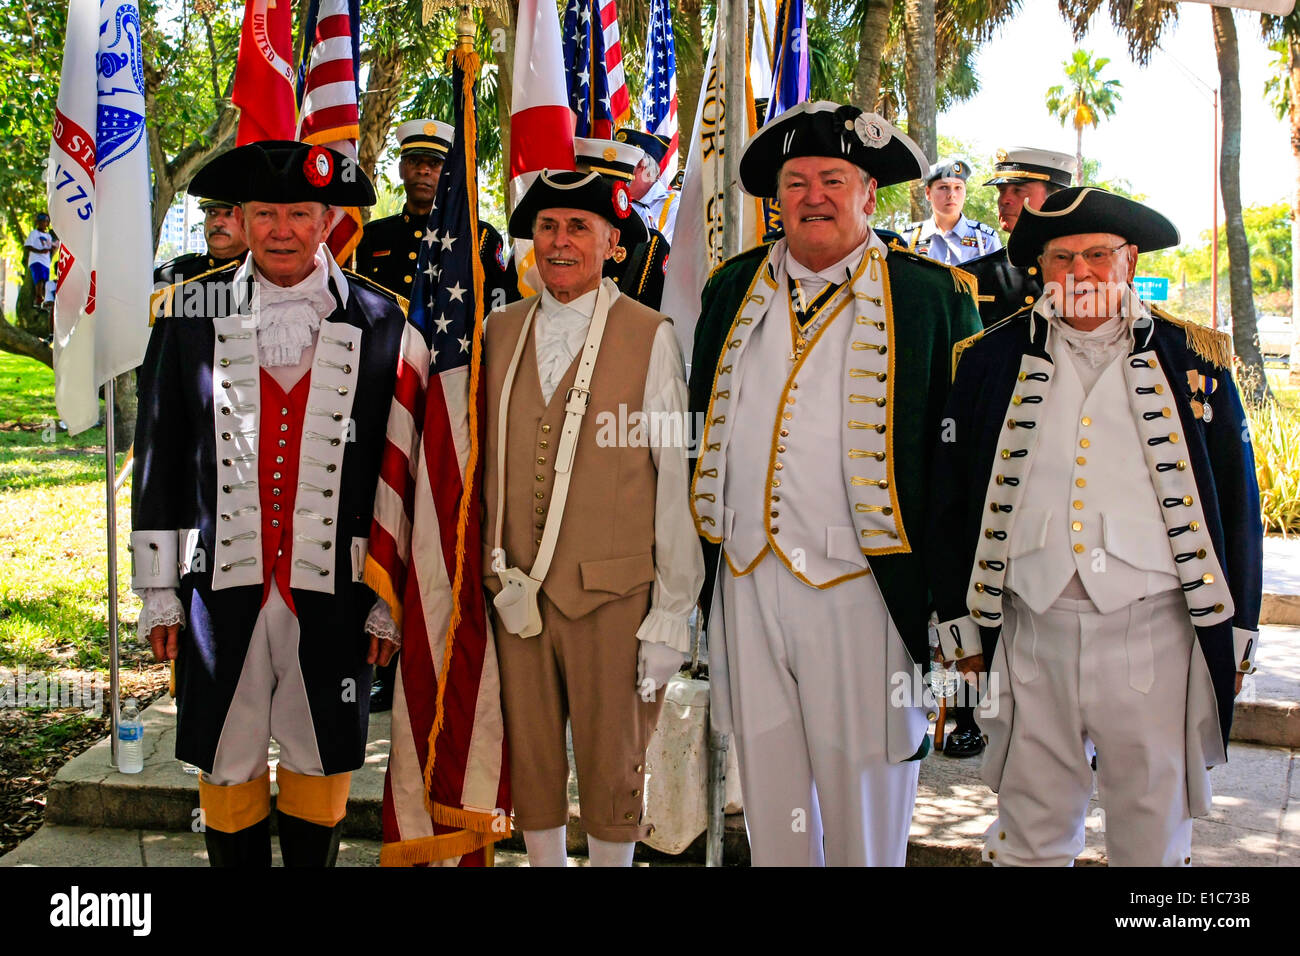 Sons of the American Revolution at the Memorial Day event in Sarasota FL  Stock Photo